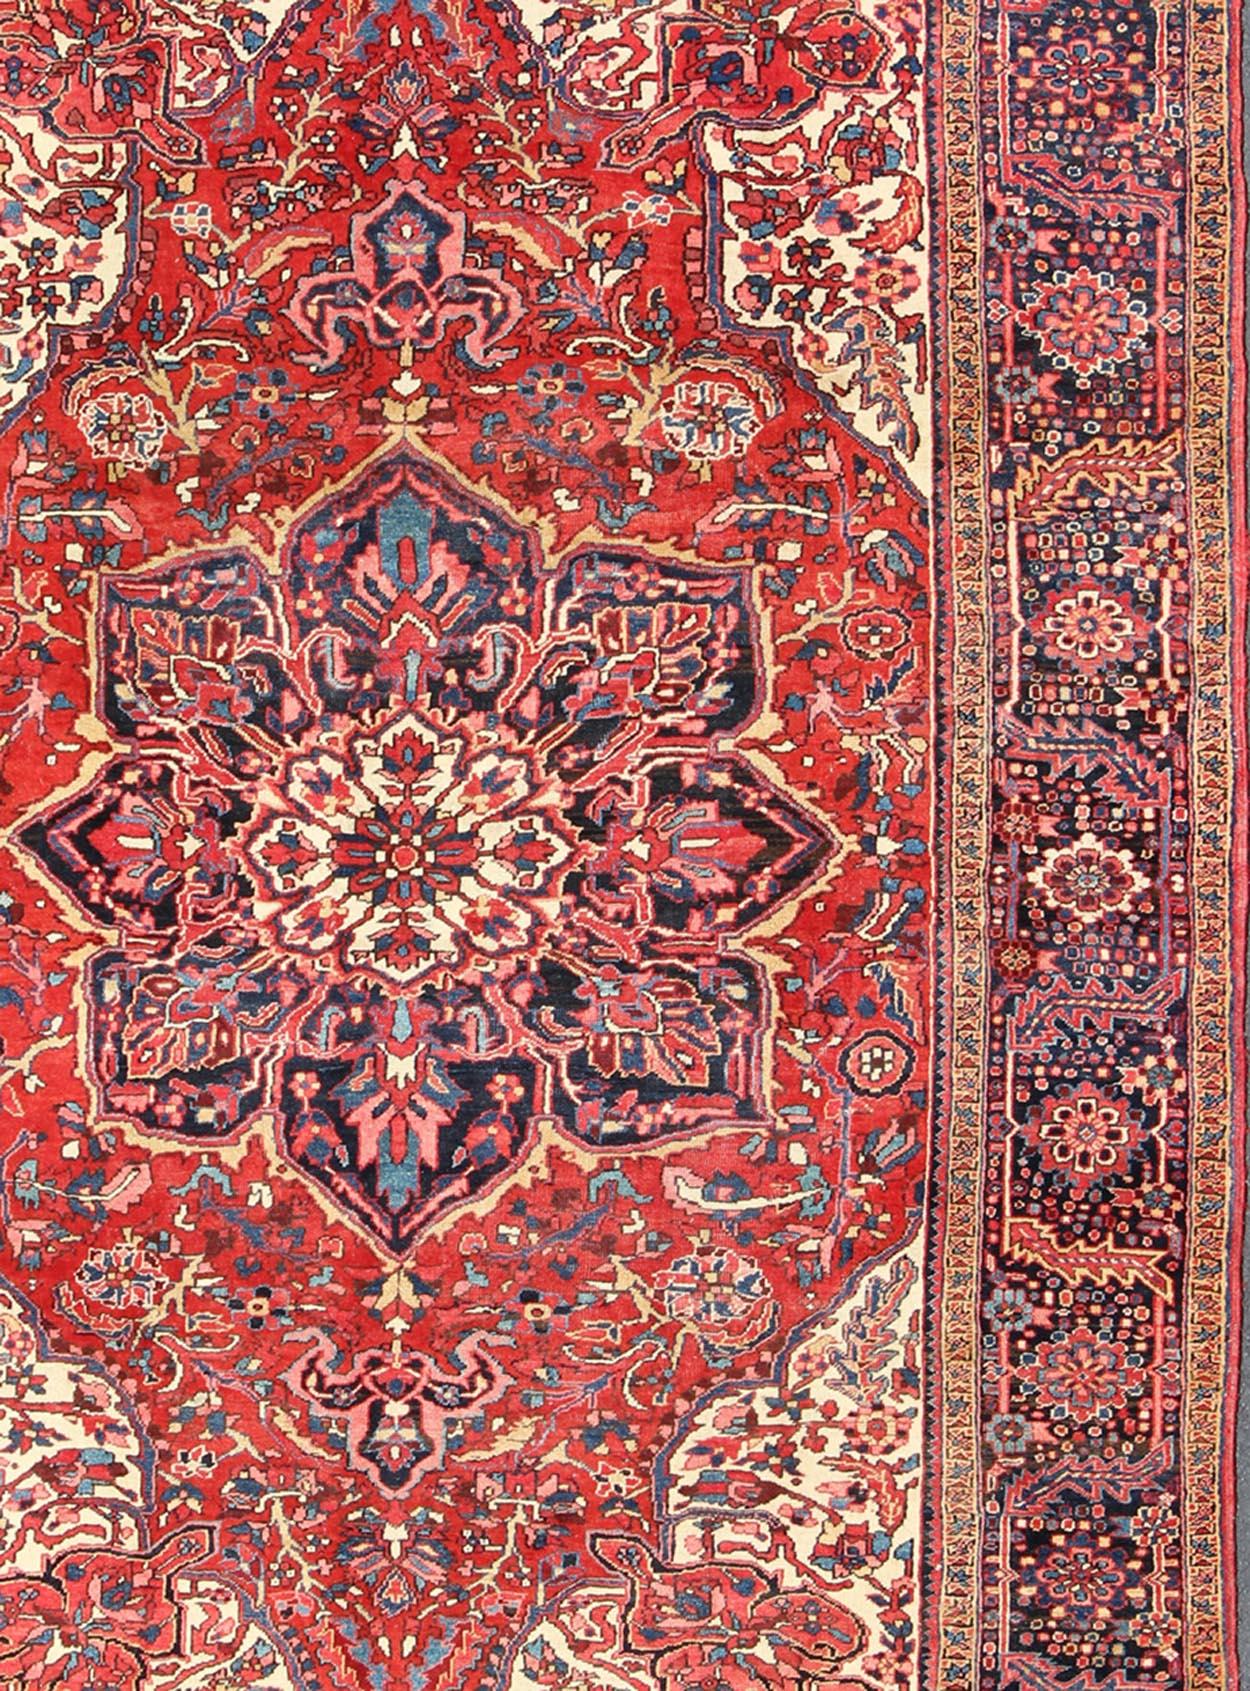 Layered Medallion design Heriz vintage rug from Persia in multi-colors, rug, TRA-SHLLI, country of origin / type: Iran / Heriz, circa 1950.

This vintage Persian Heriz, from northwest Iran, displays a geometric medallion design and a variety of